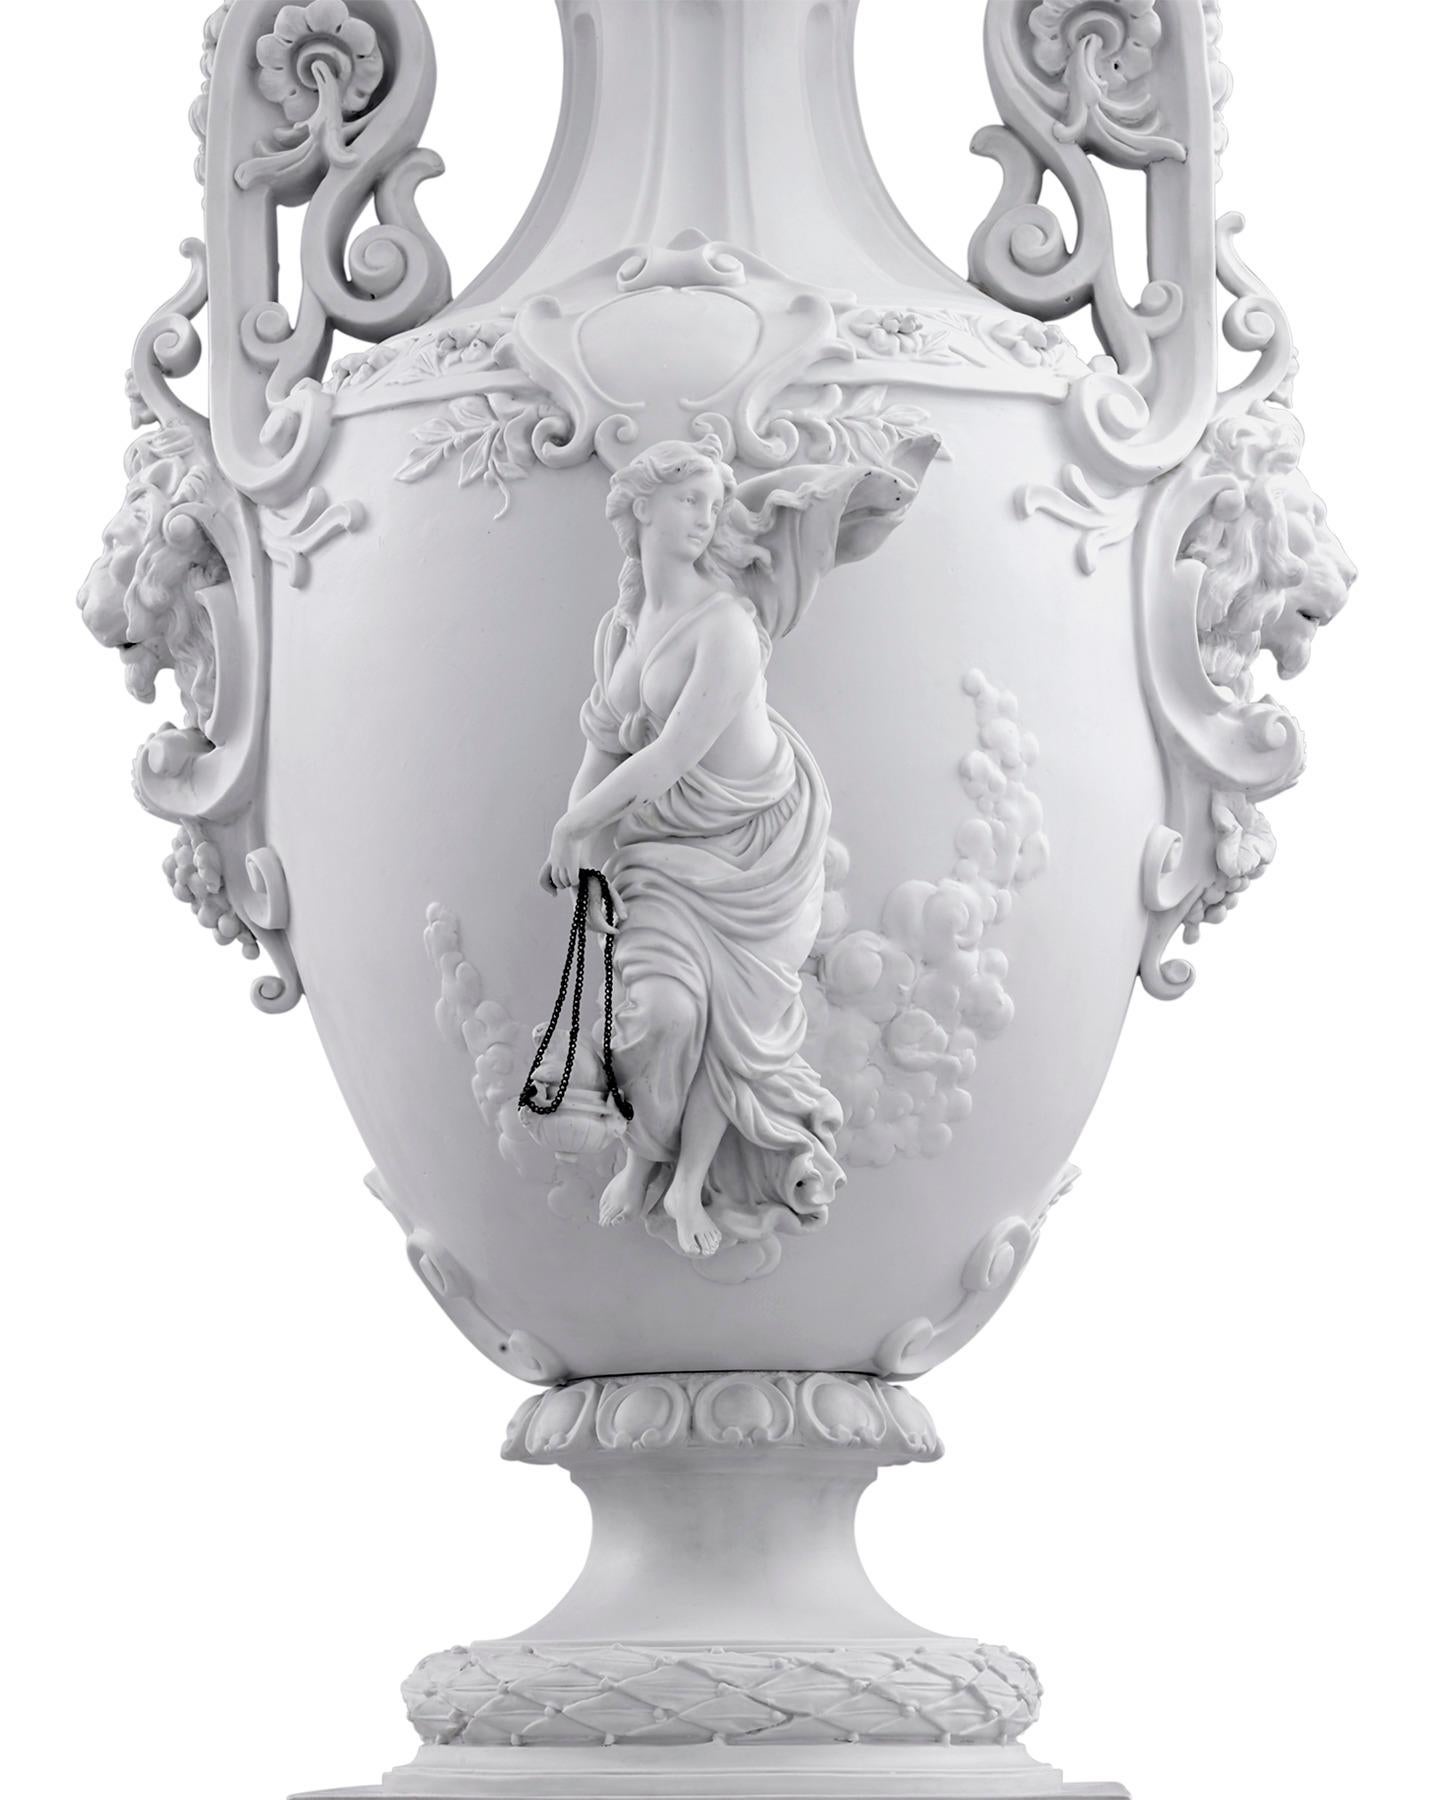 A stunning representation of the neoclassical aesthetic, this exceptional 19th century urn is handcrafted from white bisque porcelain. The impressive piece is encased by elaborate neoclassical motifs, including two female figures that recall the